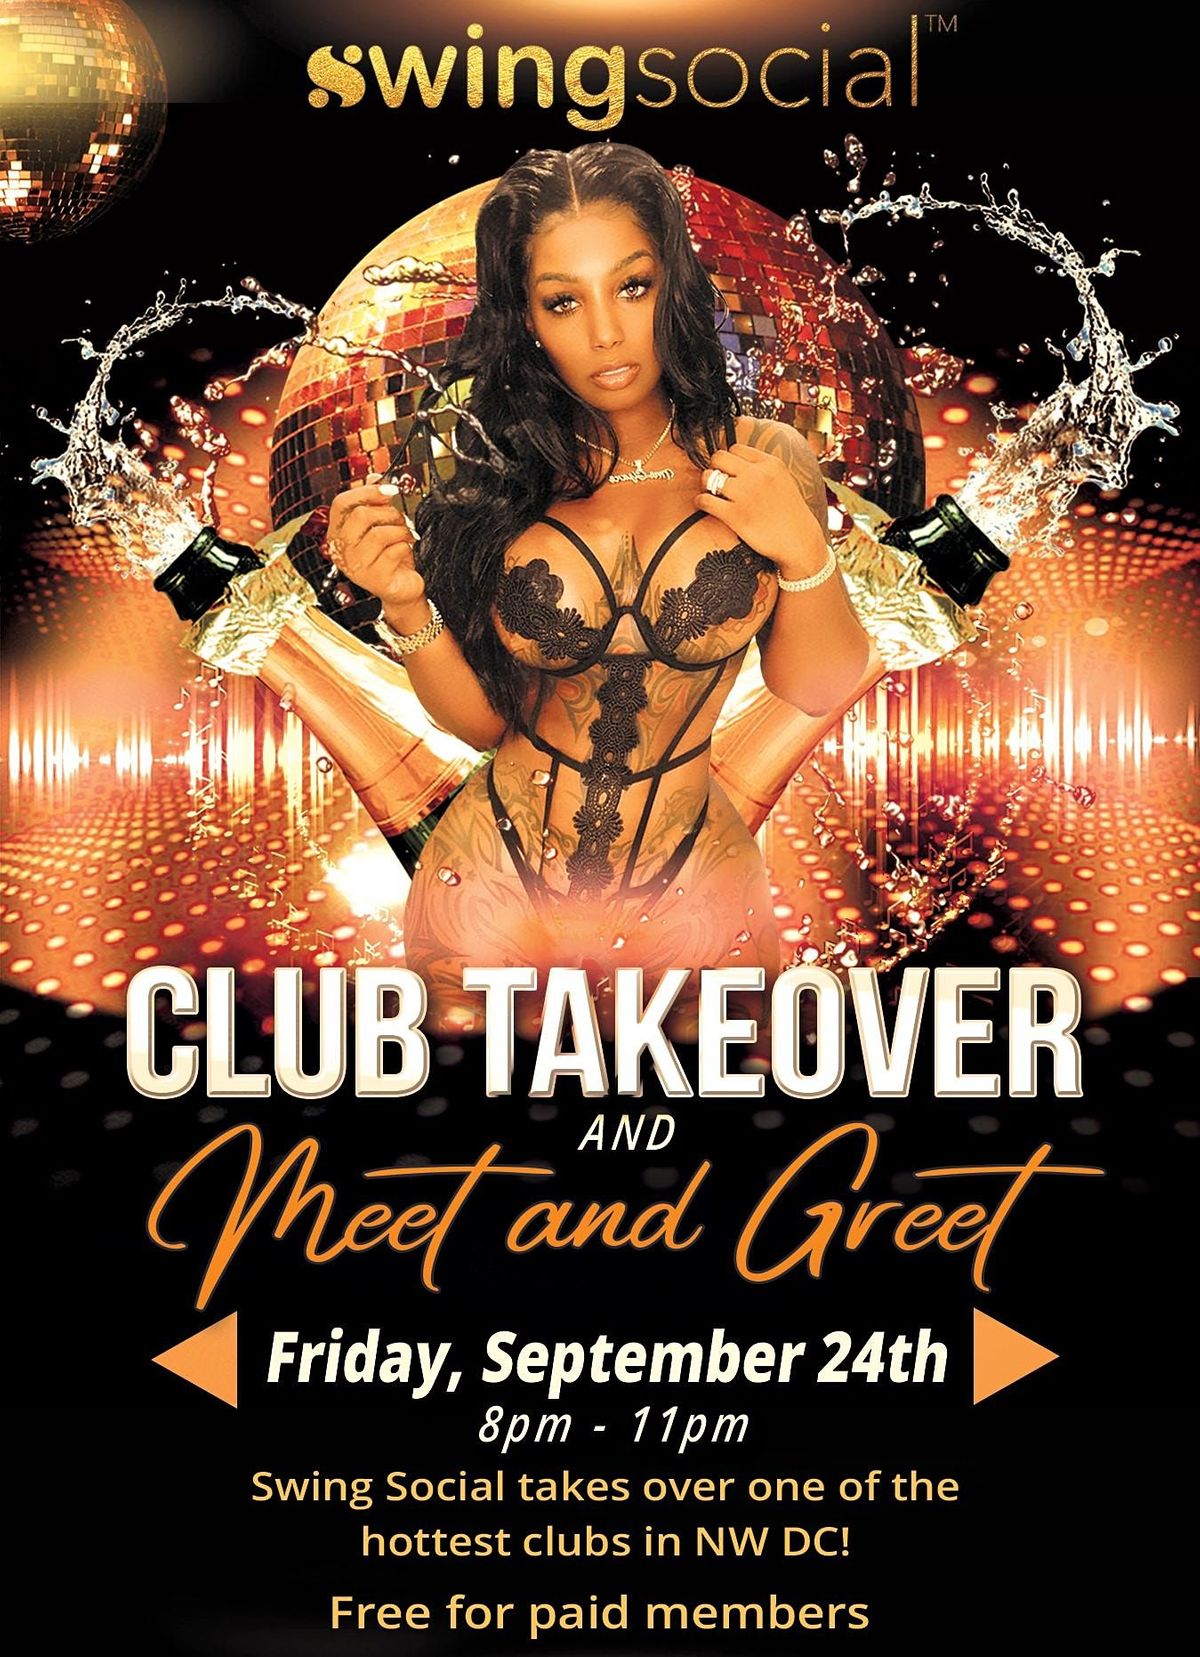 Club Takeover - Meet and Greet